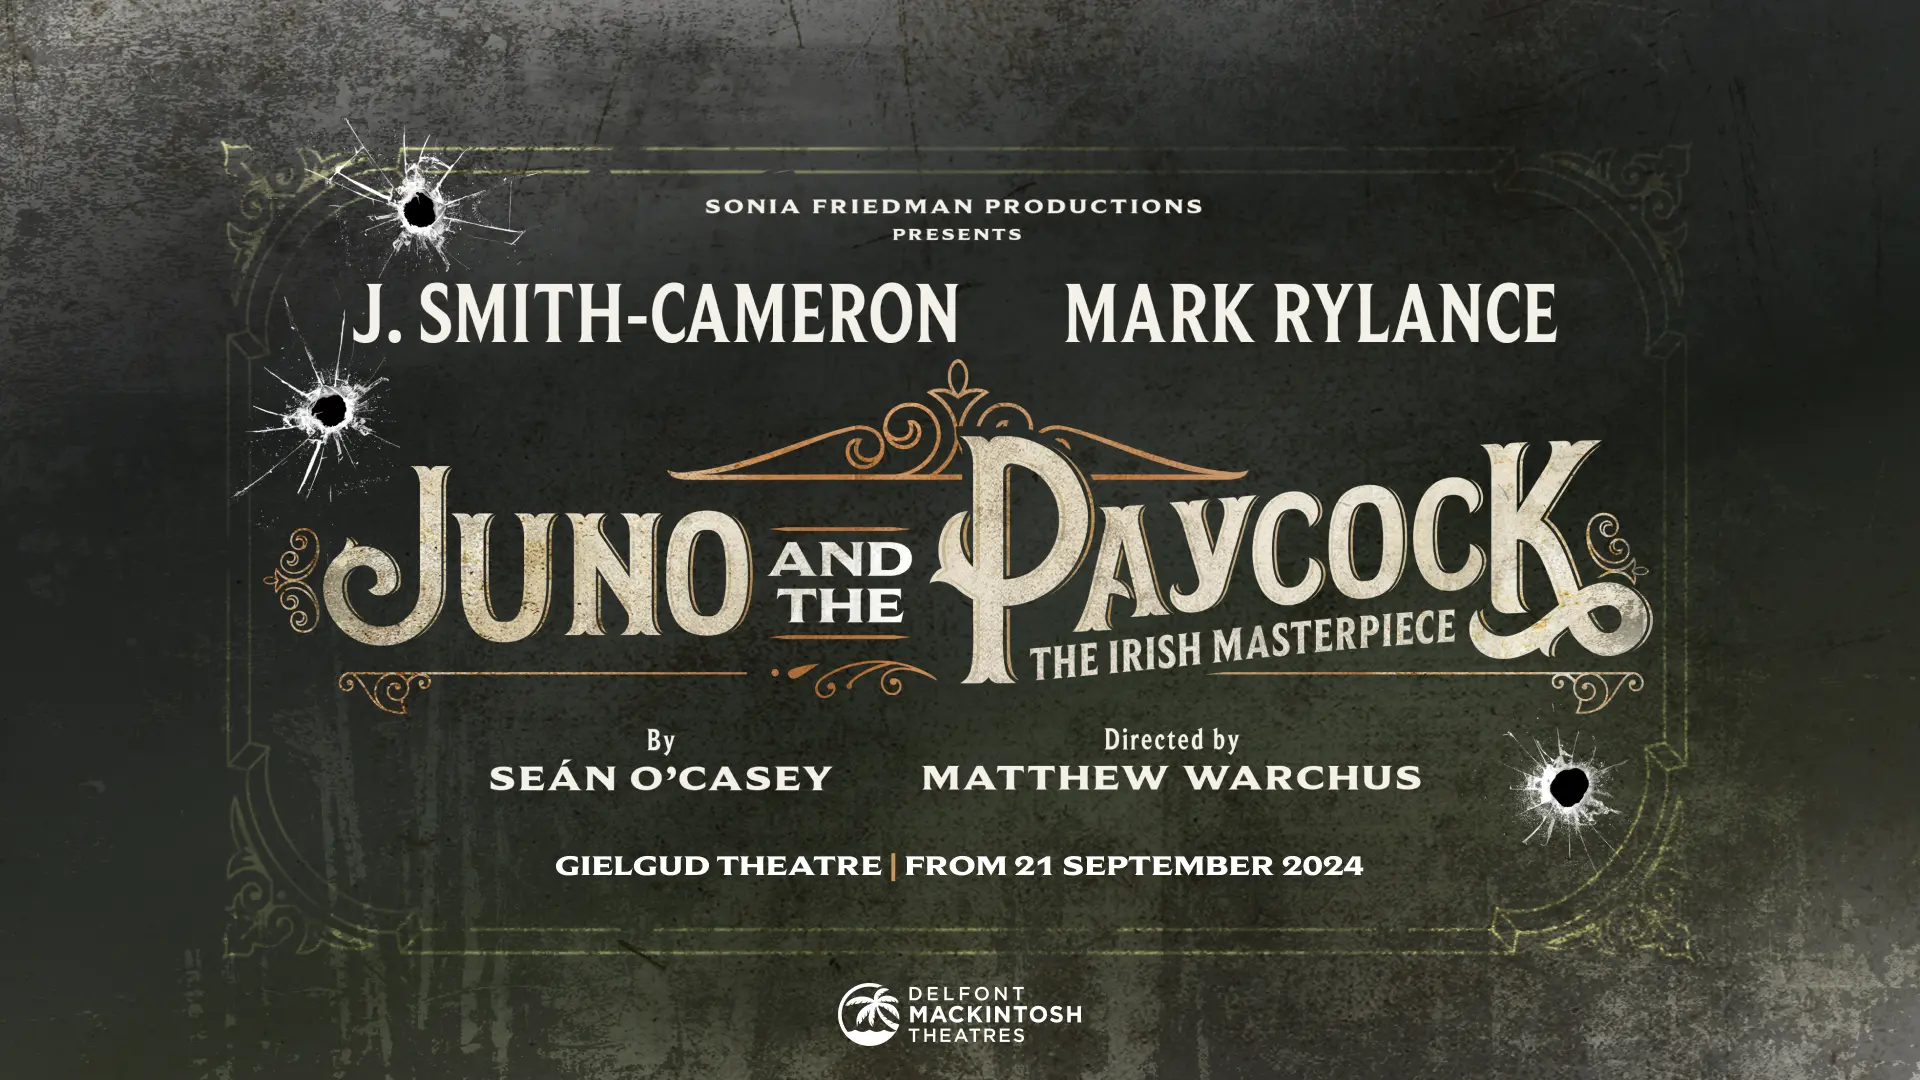 J. Smith-Cameron and Mark Rylance in JUNO AND THE PAYCOCK, directed by Matthew Warchus [West End]